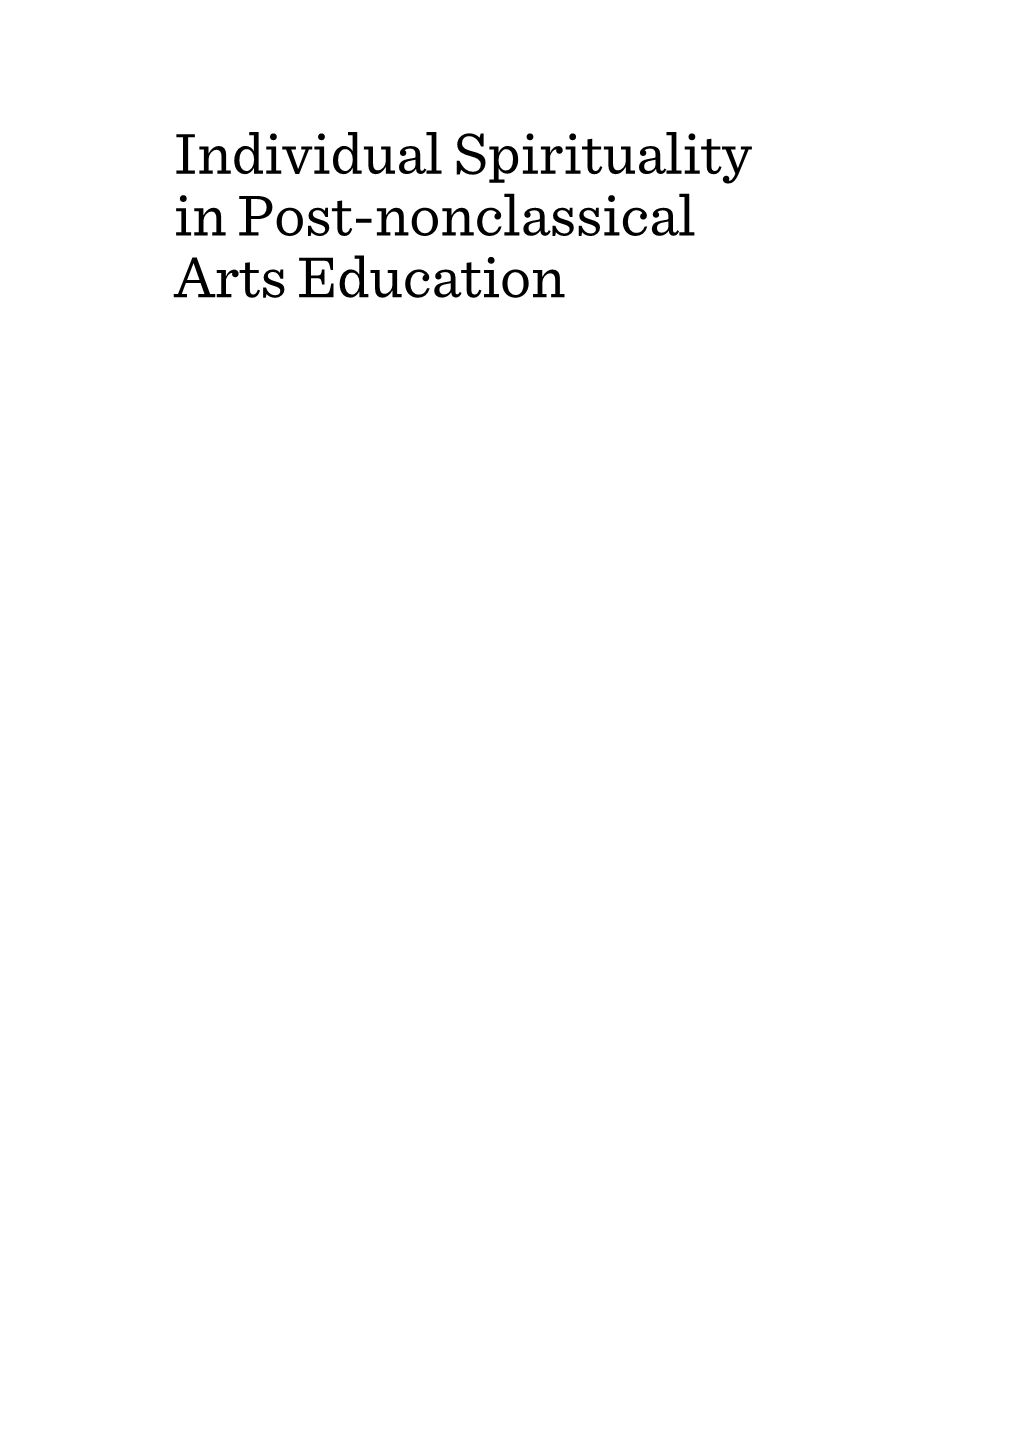 Individual Spirituality in Post-Nonclassical Arts Education